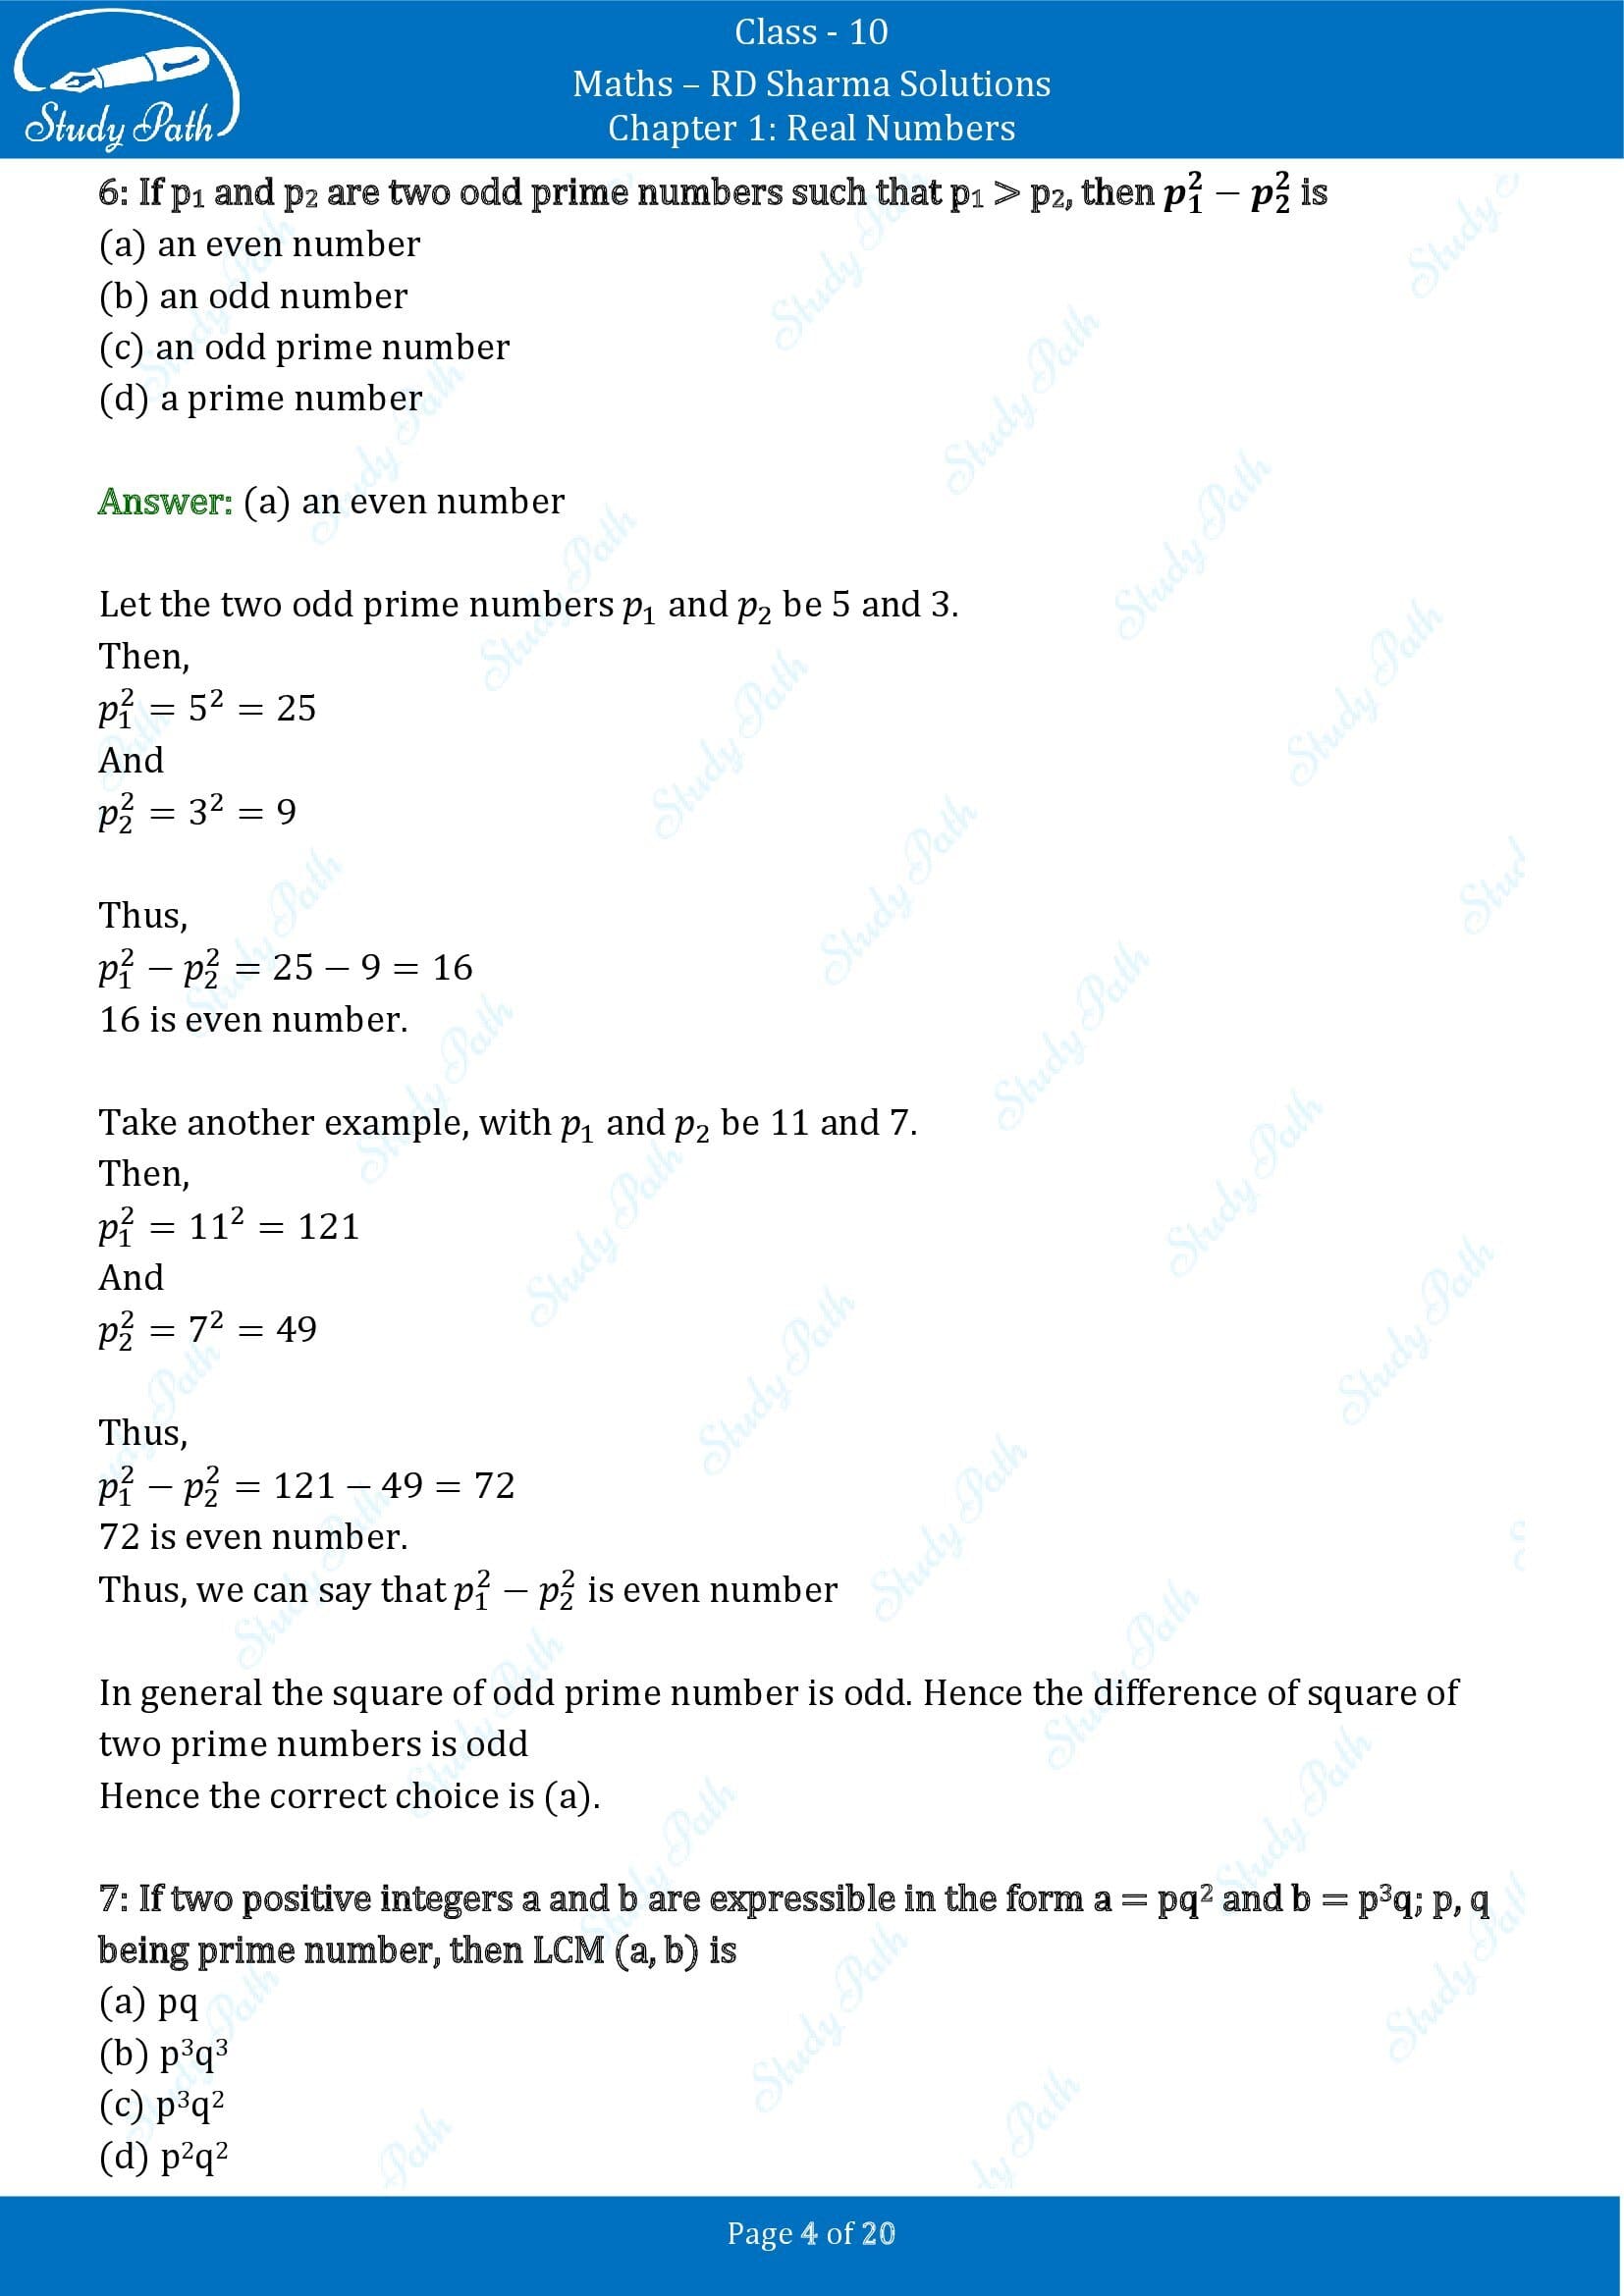 RD Sharma Solutions Class 10 Chapter 1 Real Numbers Multiple Choice Questions MCQs 00004